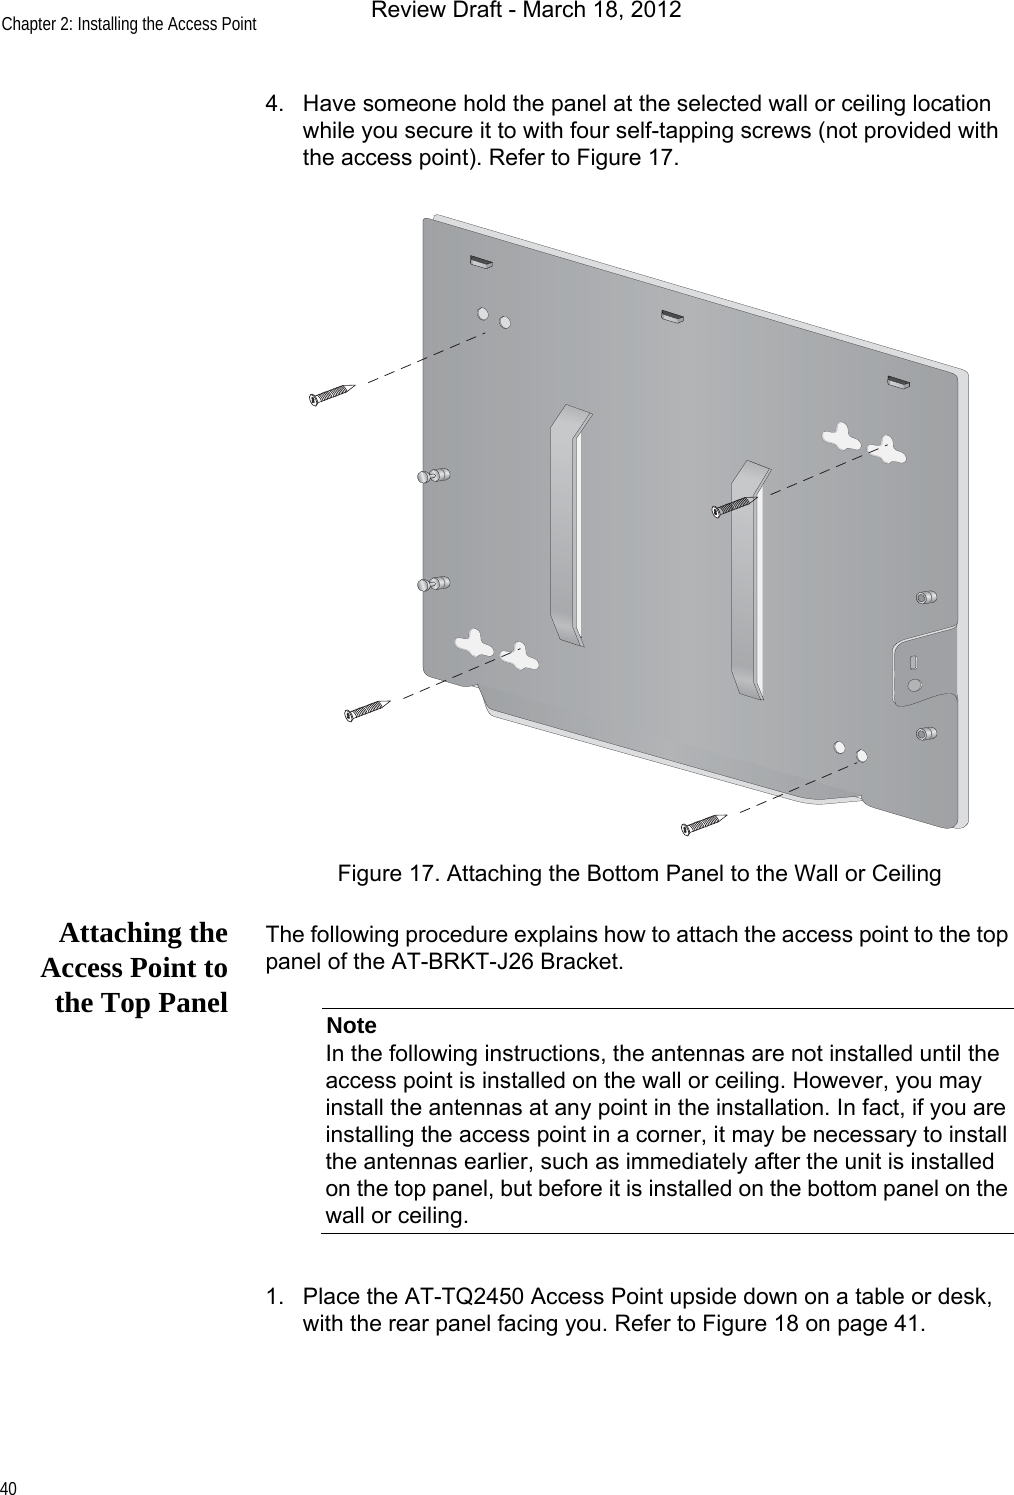 Chapter 2: Installing the Access Point404. Have someone hold the panel at the selected wall or ceiling location while you secure it to with four self-tapping screws (not provided with the access point). Refer to Figure 17.Figure 17. Attaching the Bottom Panel to the Wall or CeilingAttaching theAccess Point tothe Top PanelThe following procedure explains how to attach the access point to the top panel of the AT-BRKT-J26 Bracket.NoteIn the following instructions, the antennas are not installed until the access point is installed on the wall or ceiling. However, you may install the antennas at any point in the installation. In fact, if you are installing the access point in a corner, it may be necessary to install the antennas earlier, such as immediately after the unit is installed on the top panel, but before it is installed on the bottom panel on the wall or ceiling.1. Place the AT-TQ2450 Access Point upside down on a table or desk, with the rear panel facing you. Refer to Figure 18 on page 41.Review Draft - March 18, 2012